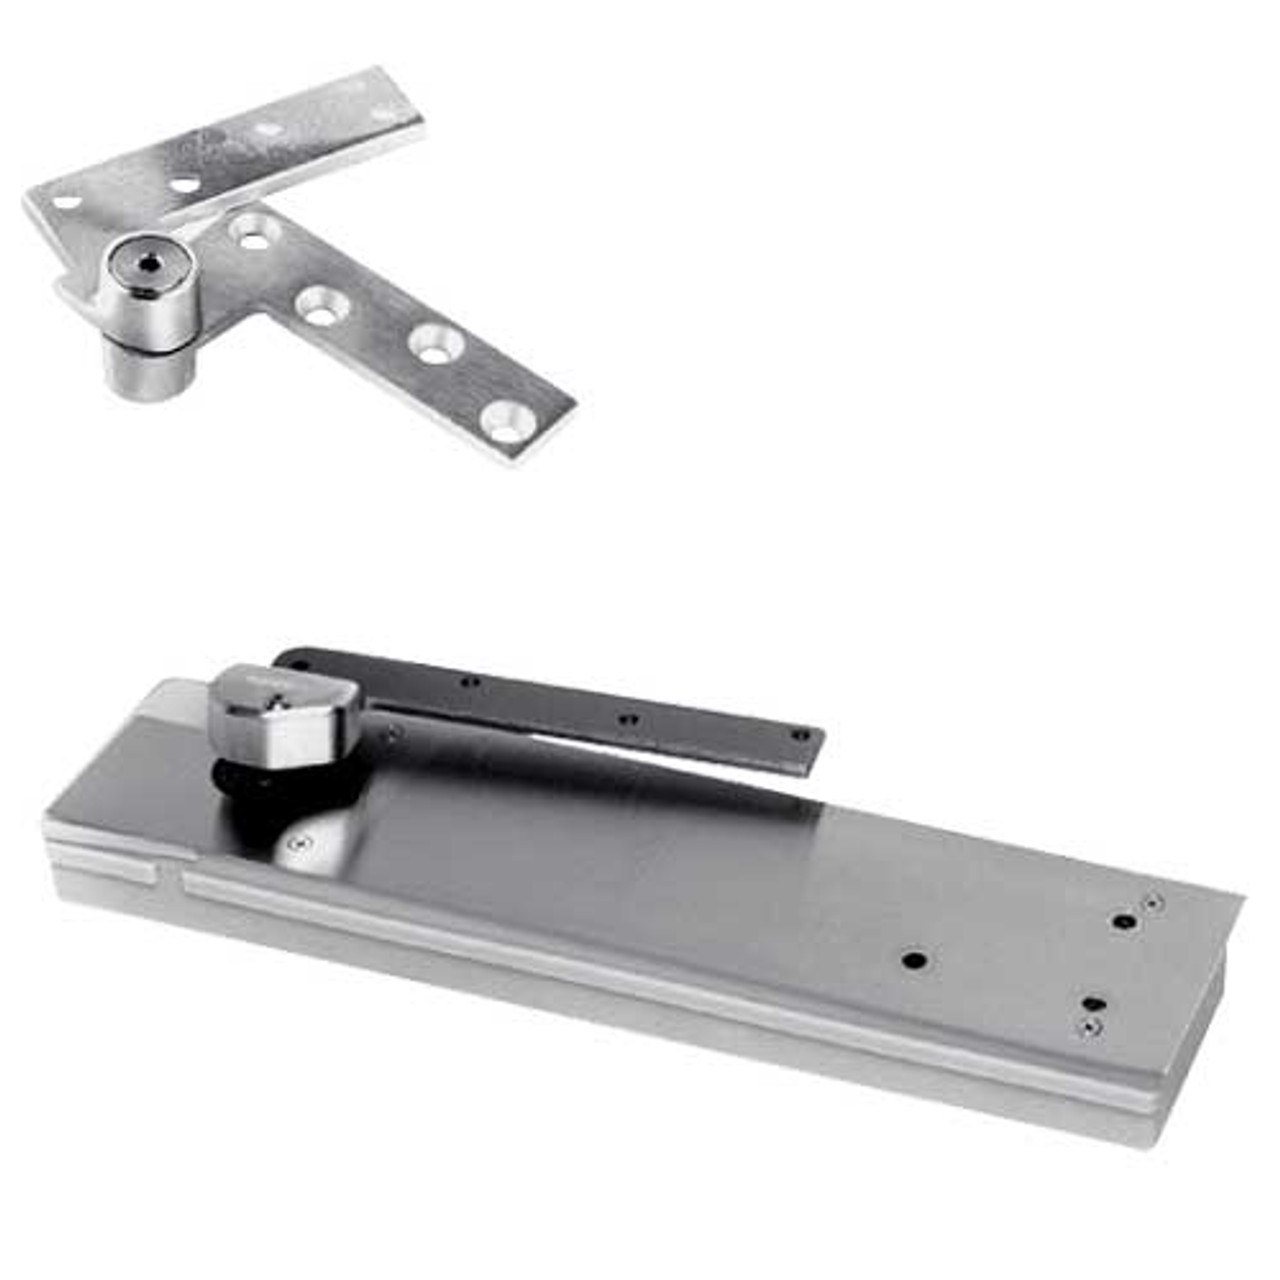 5103ABC180-1-1/2OS-LFP-LH-626 Rixson 51 Series 1-1/2" Offset Hung Shallow Depth Floor Closers in Satin Chrome Finish